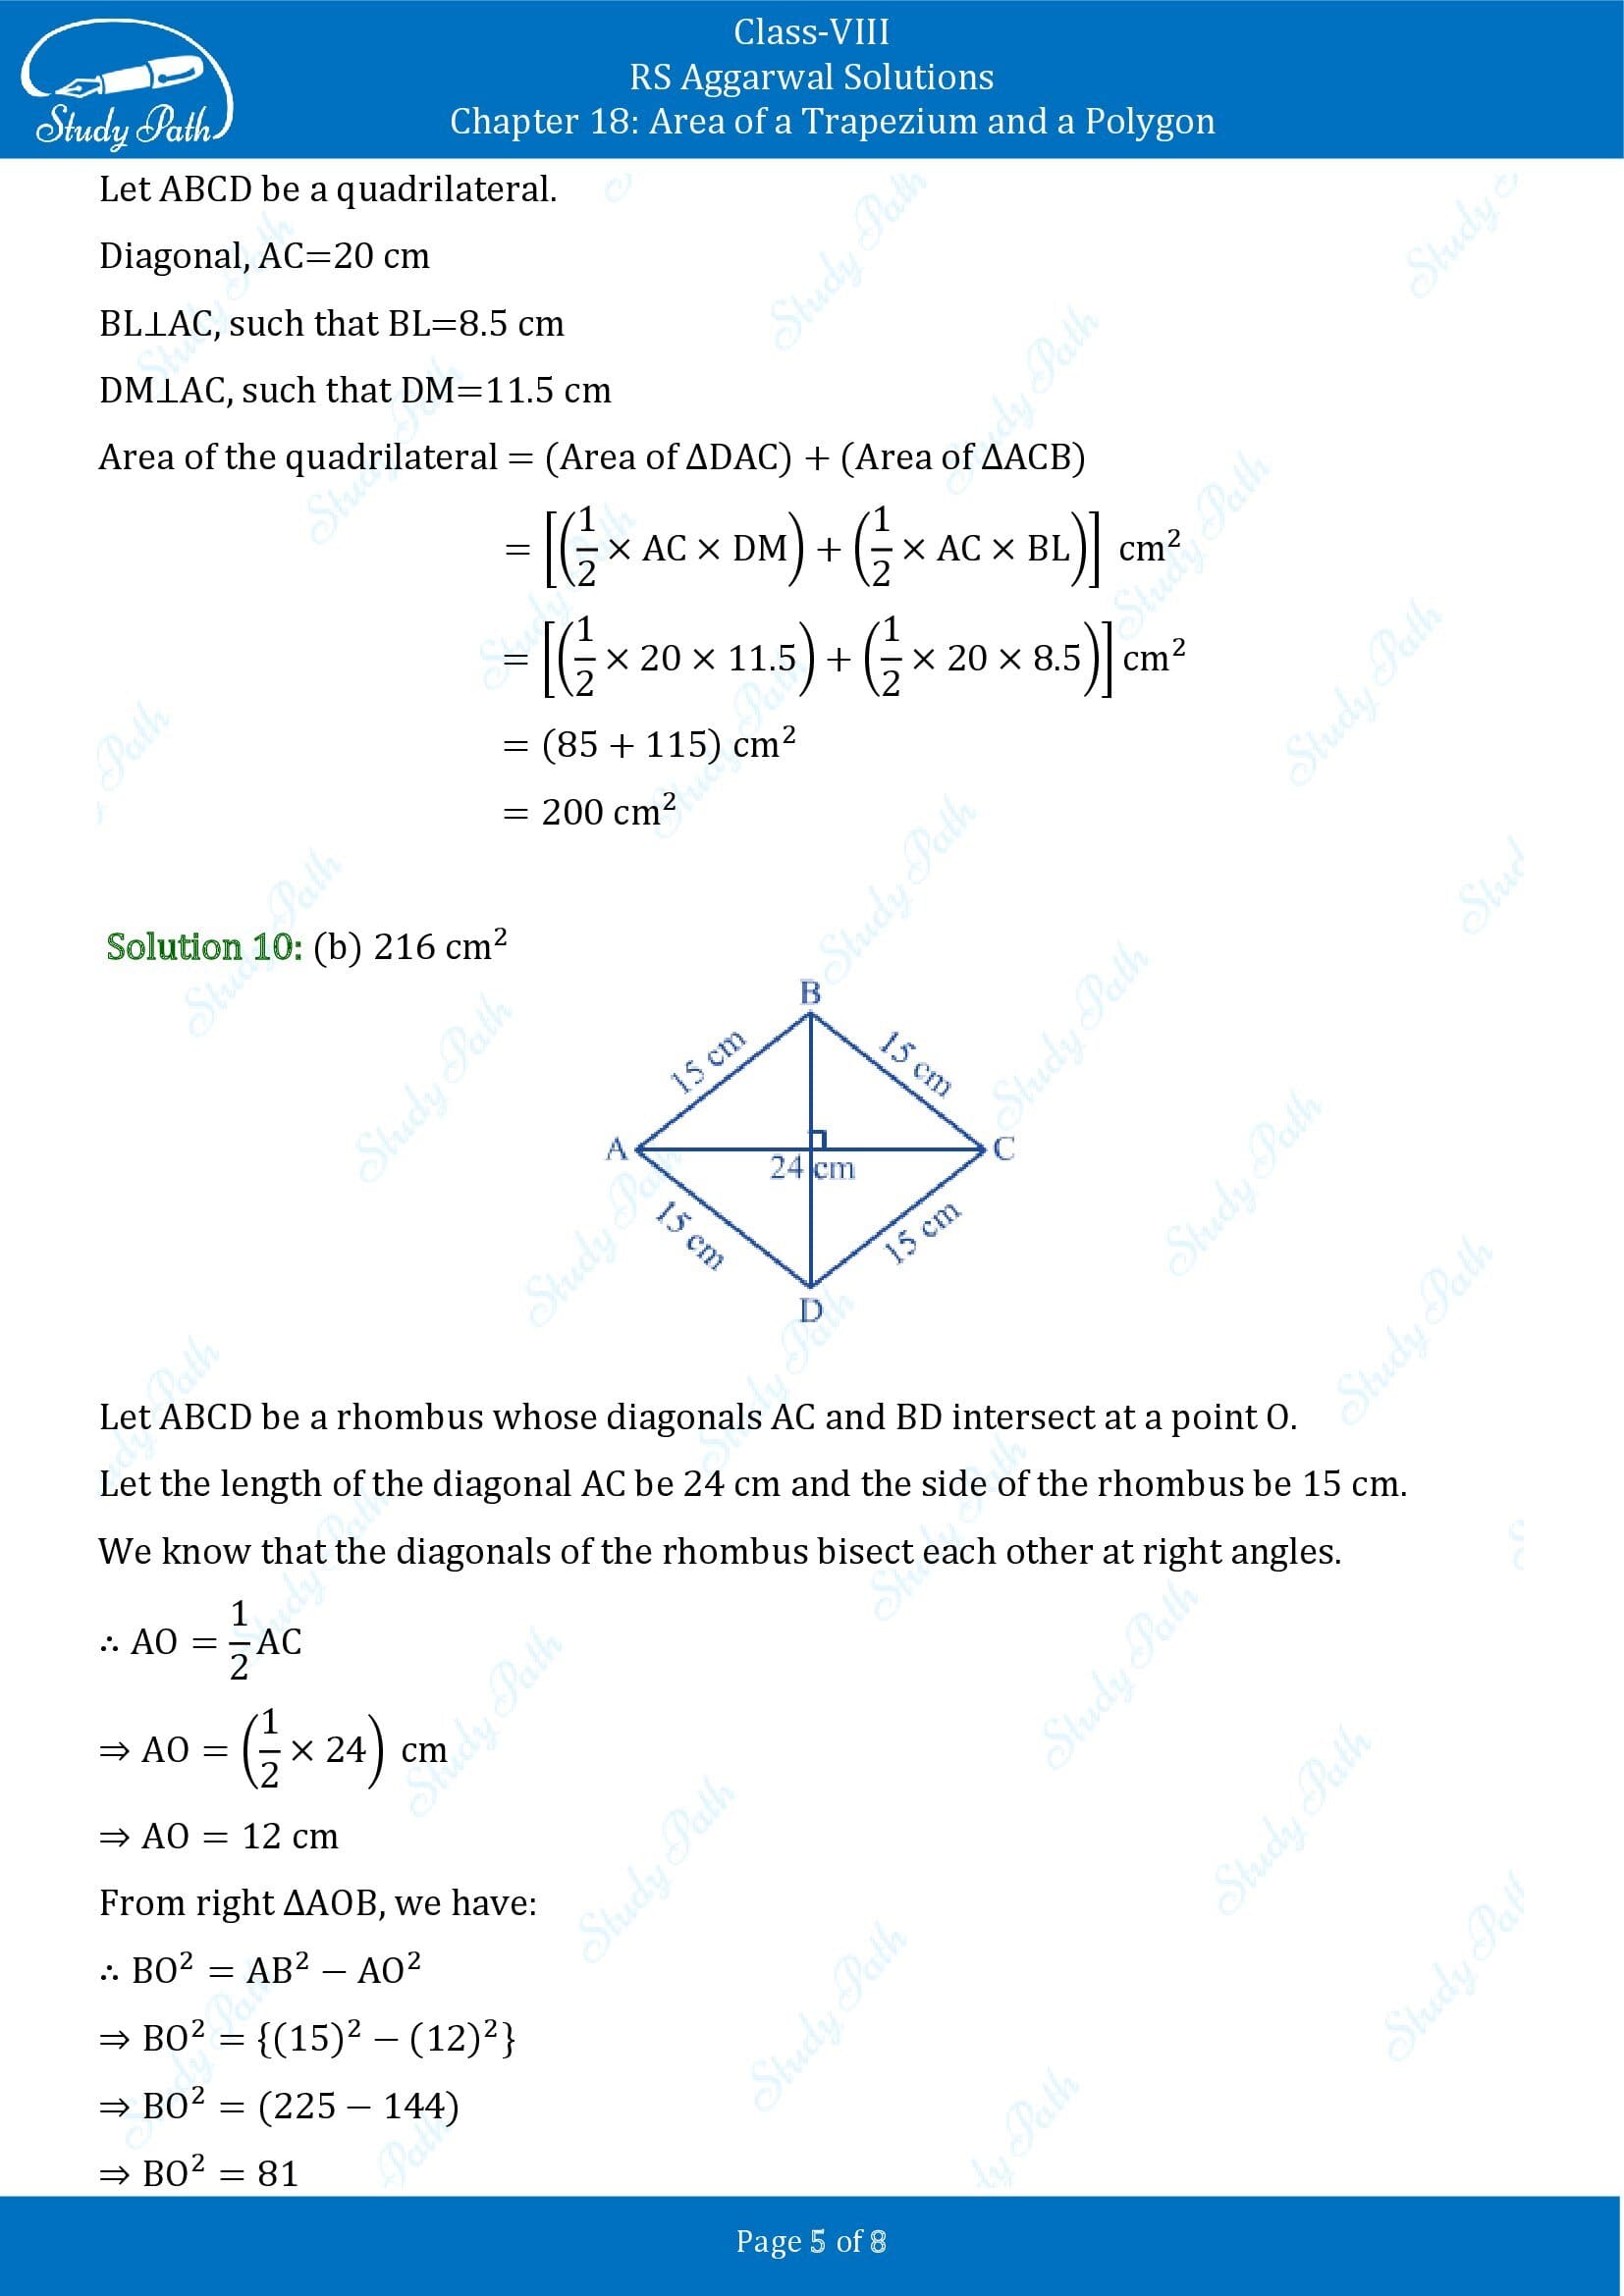 RS Aggarwal Solutions Class 8 Chapter 18 Area of a Trapezium and a Polygon Test Paper 00005